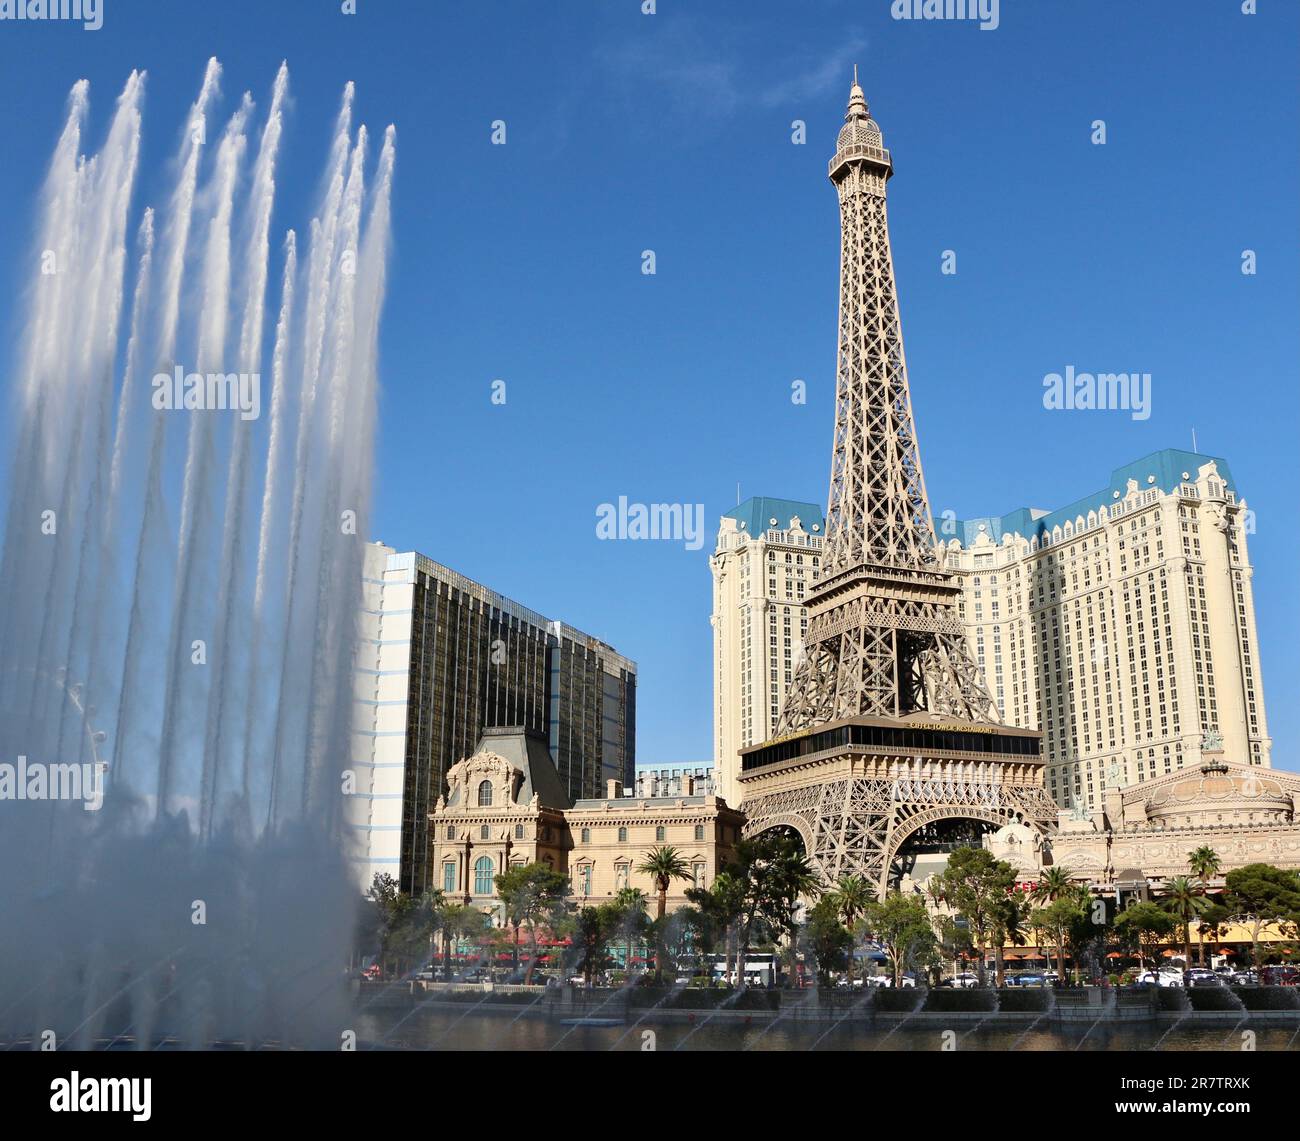 Bellagio resort fountains during a display with the fake half scale Eiffel Tower at the Paris casino and resort in afternoon sun Las Vegas Nevada USA Stock Photo